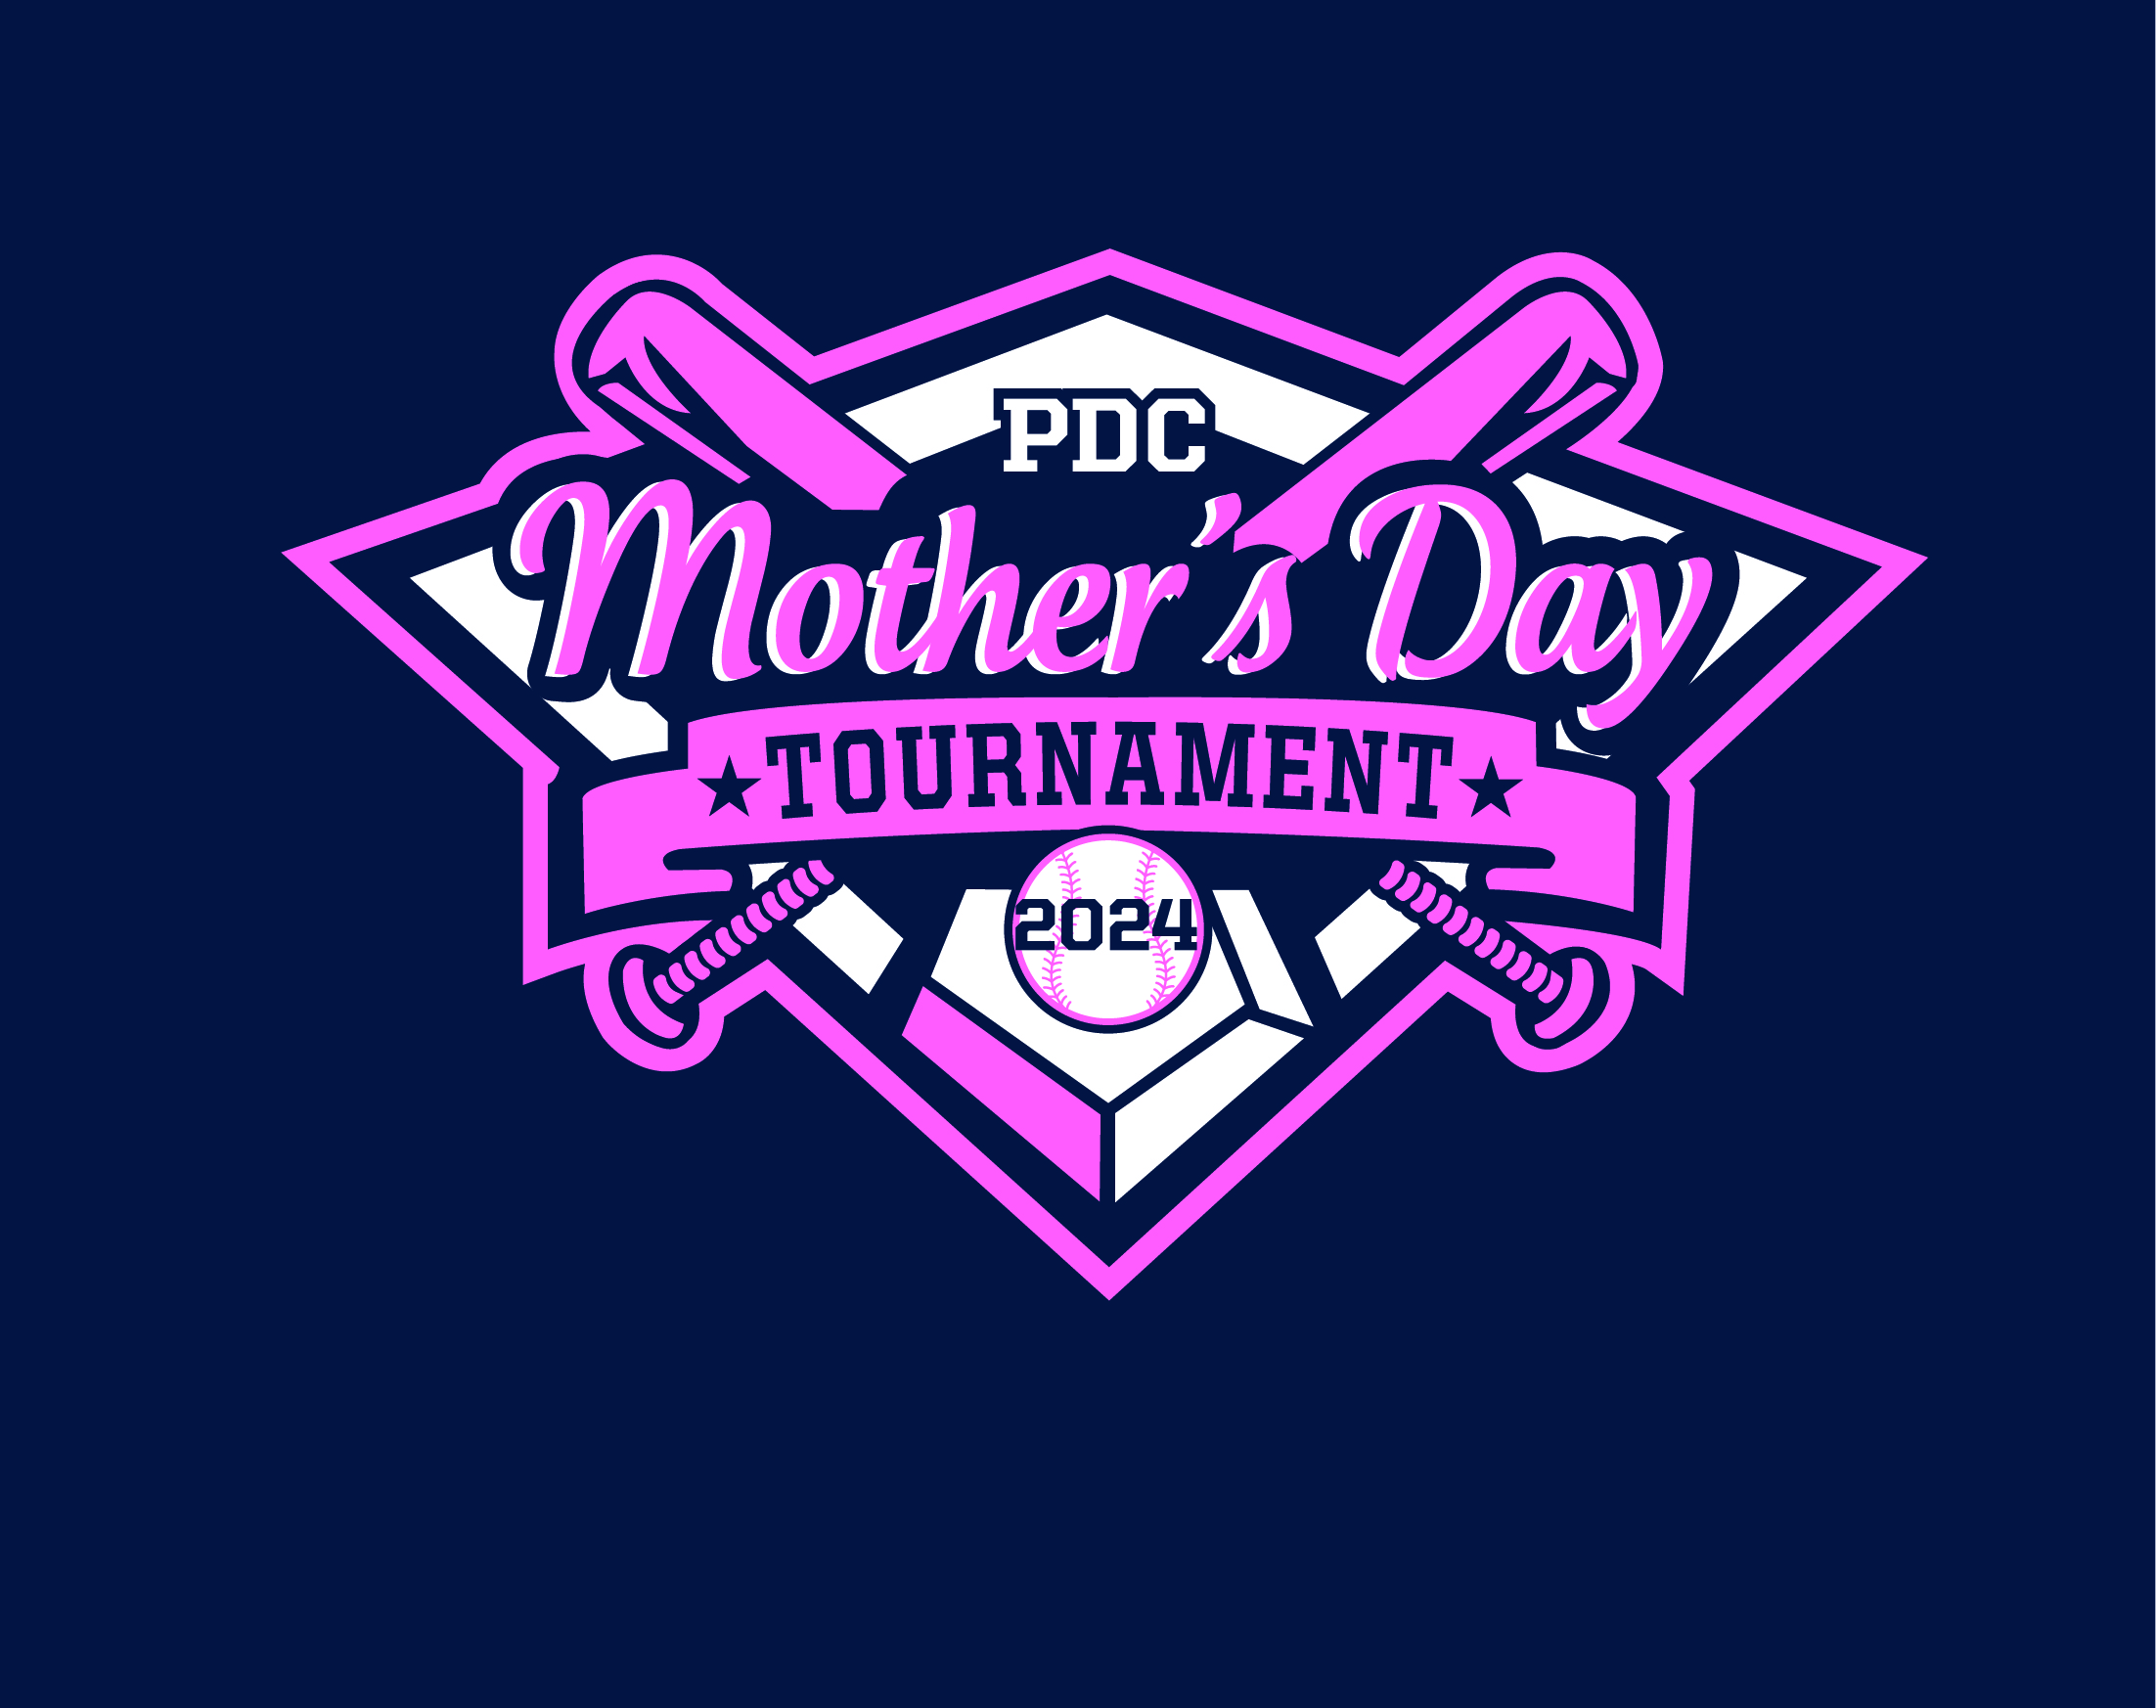 11U MOTHER'S DAY TOURNAMENT